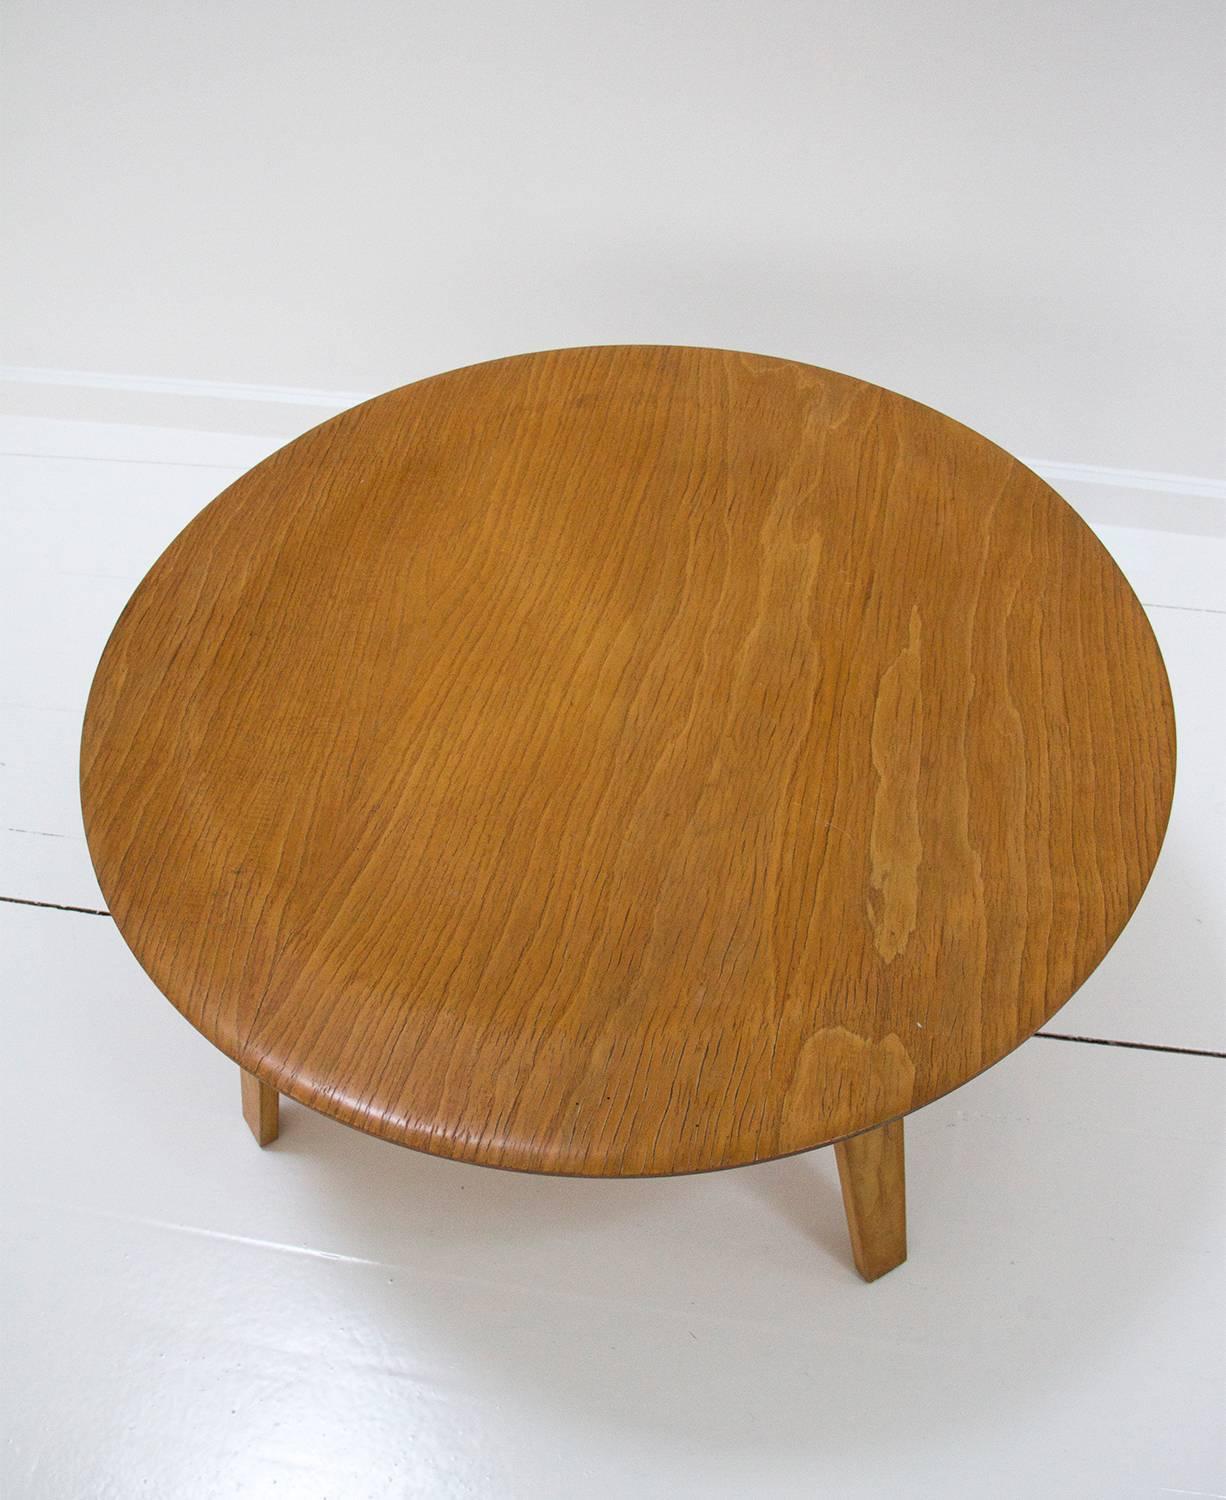 Wood Charles & Ray Eames Coffee Table Model CTW in Plywood, 1940s United States